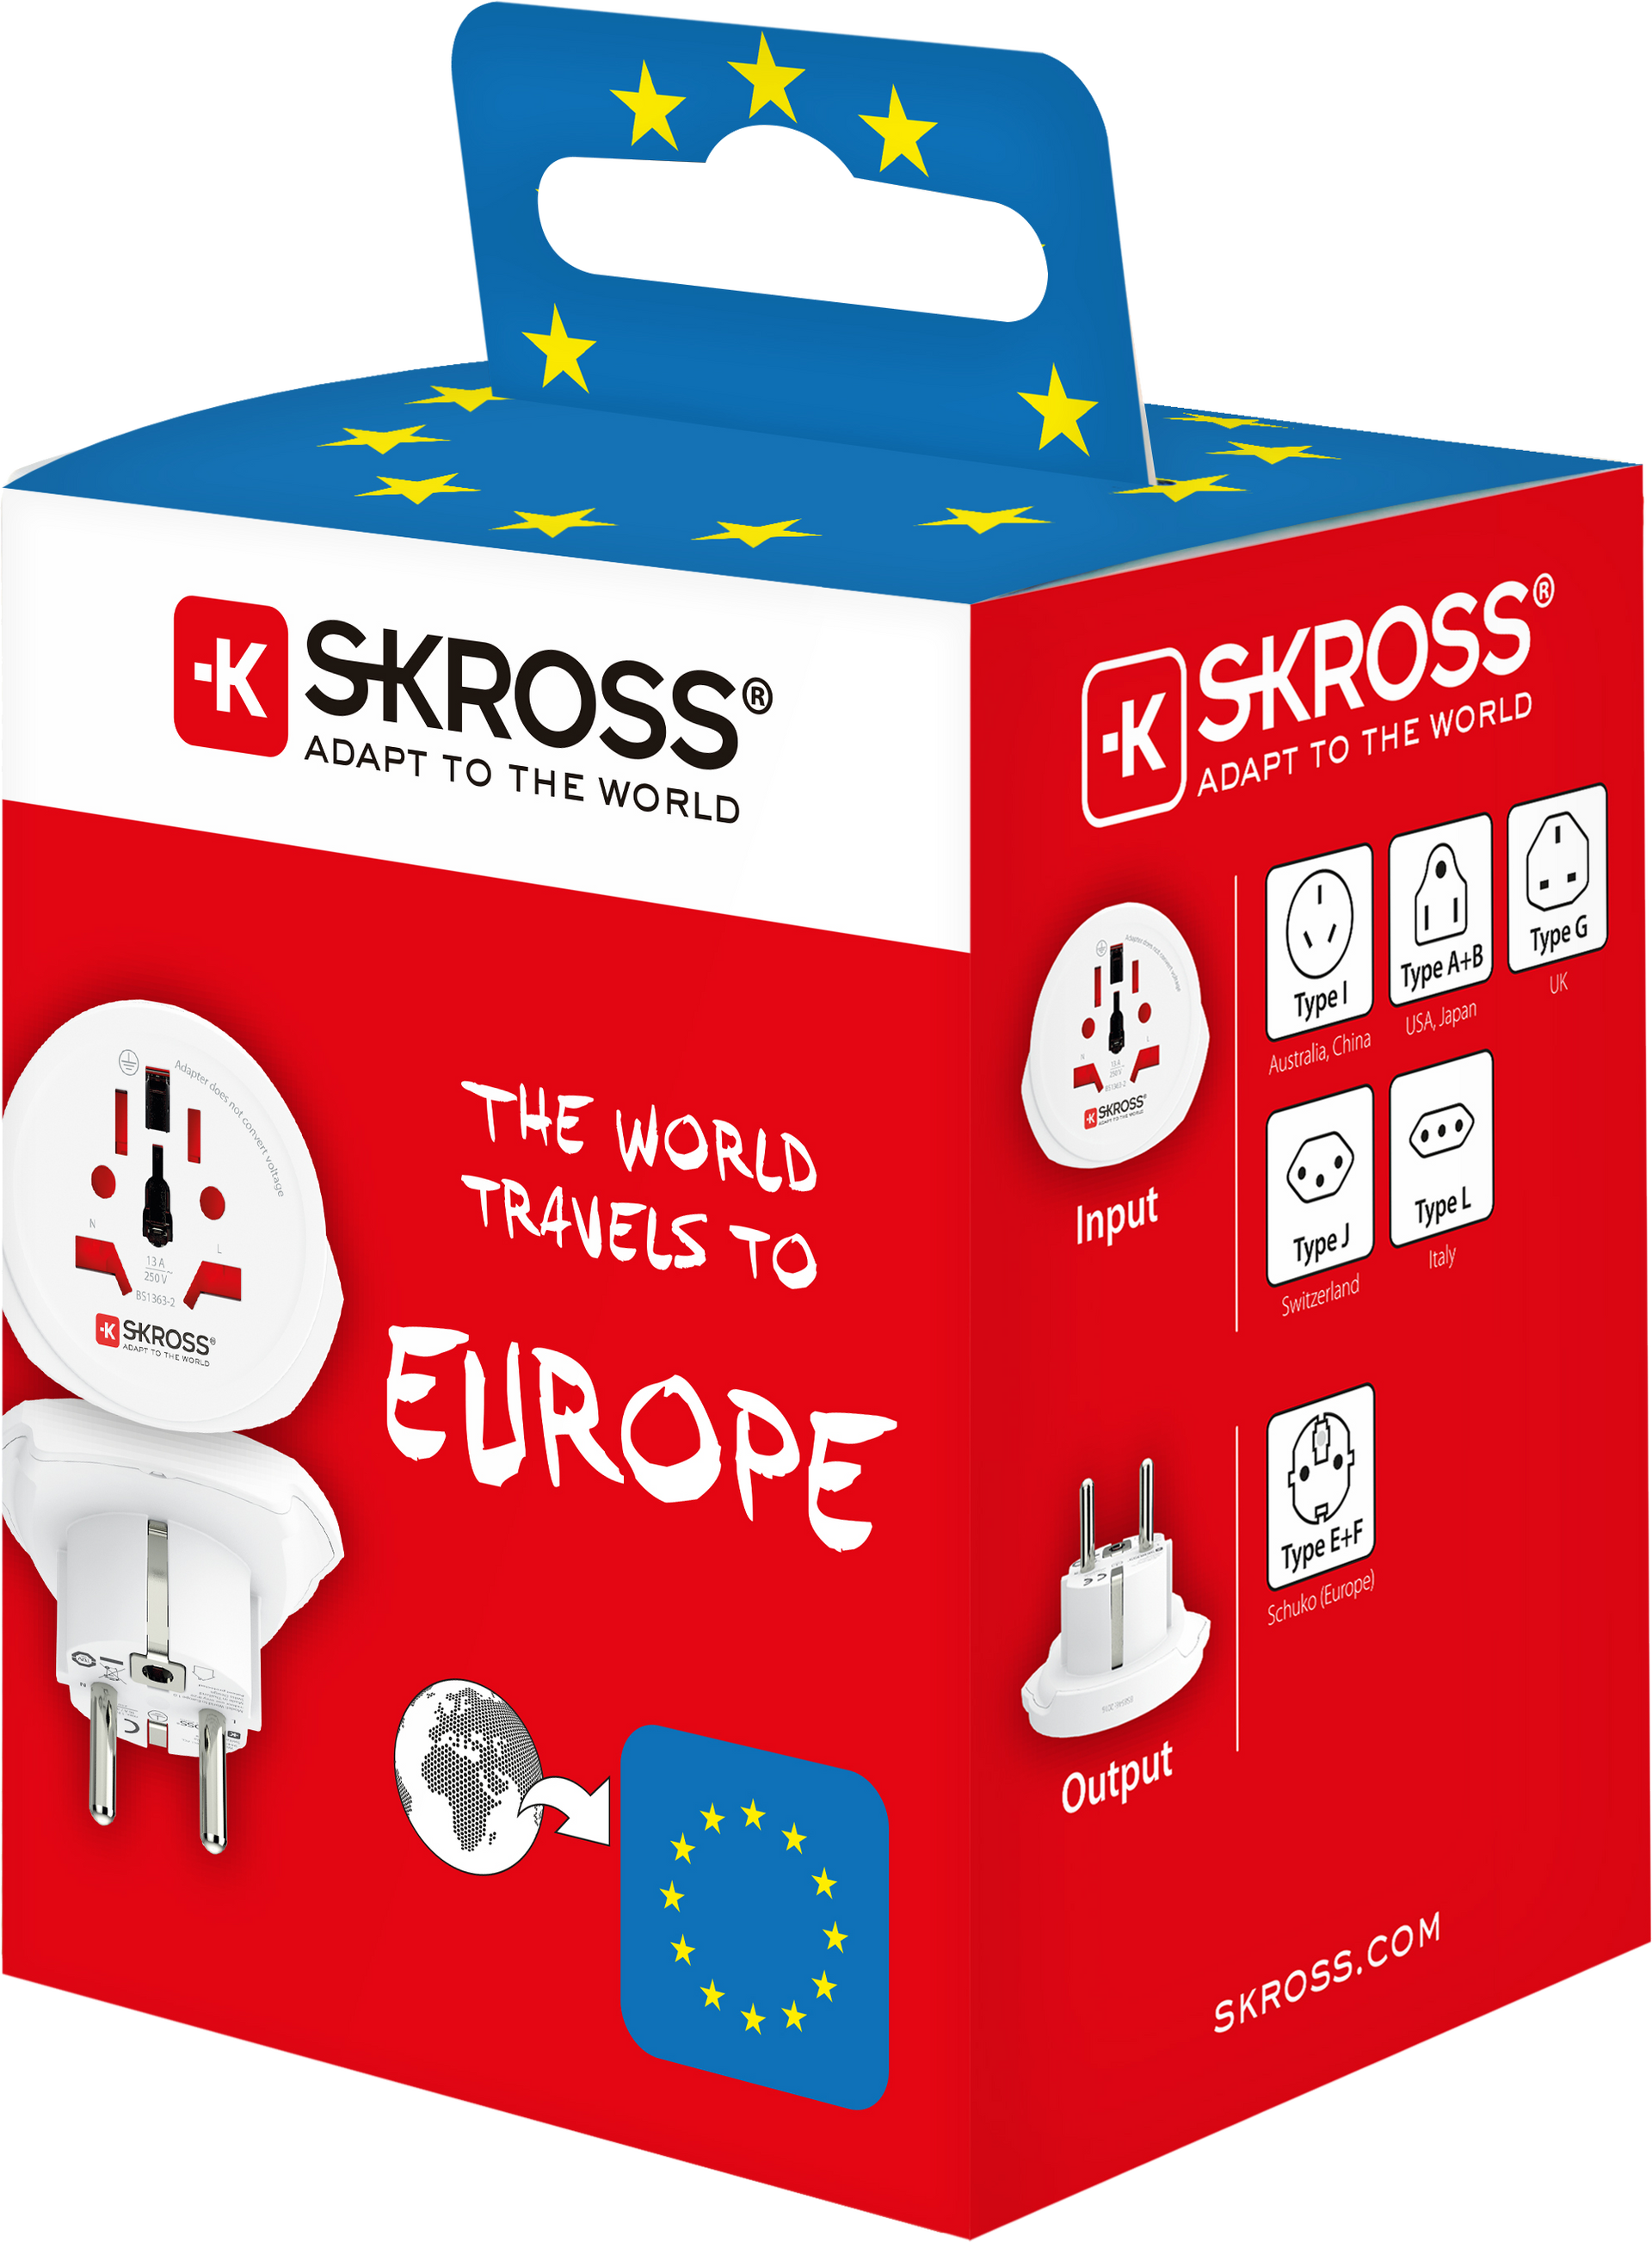 Skross 3-Pole World to Europe Travel Adapter Packaging